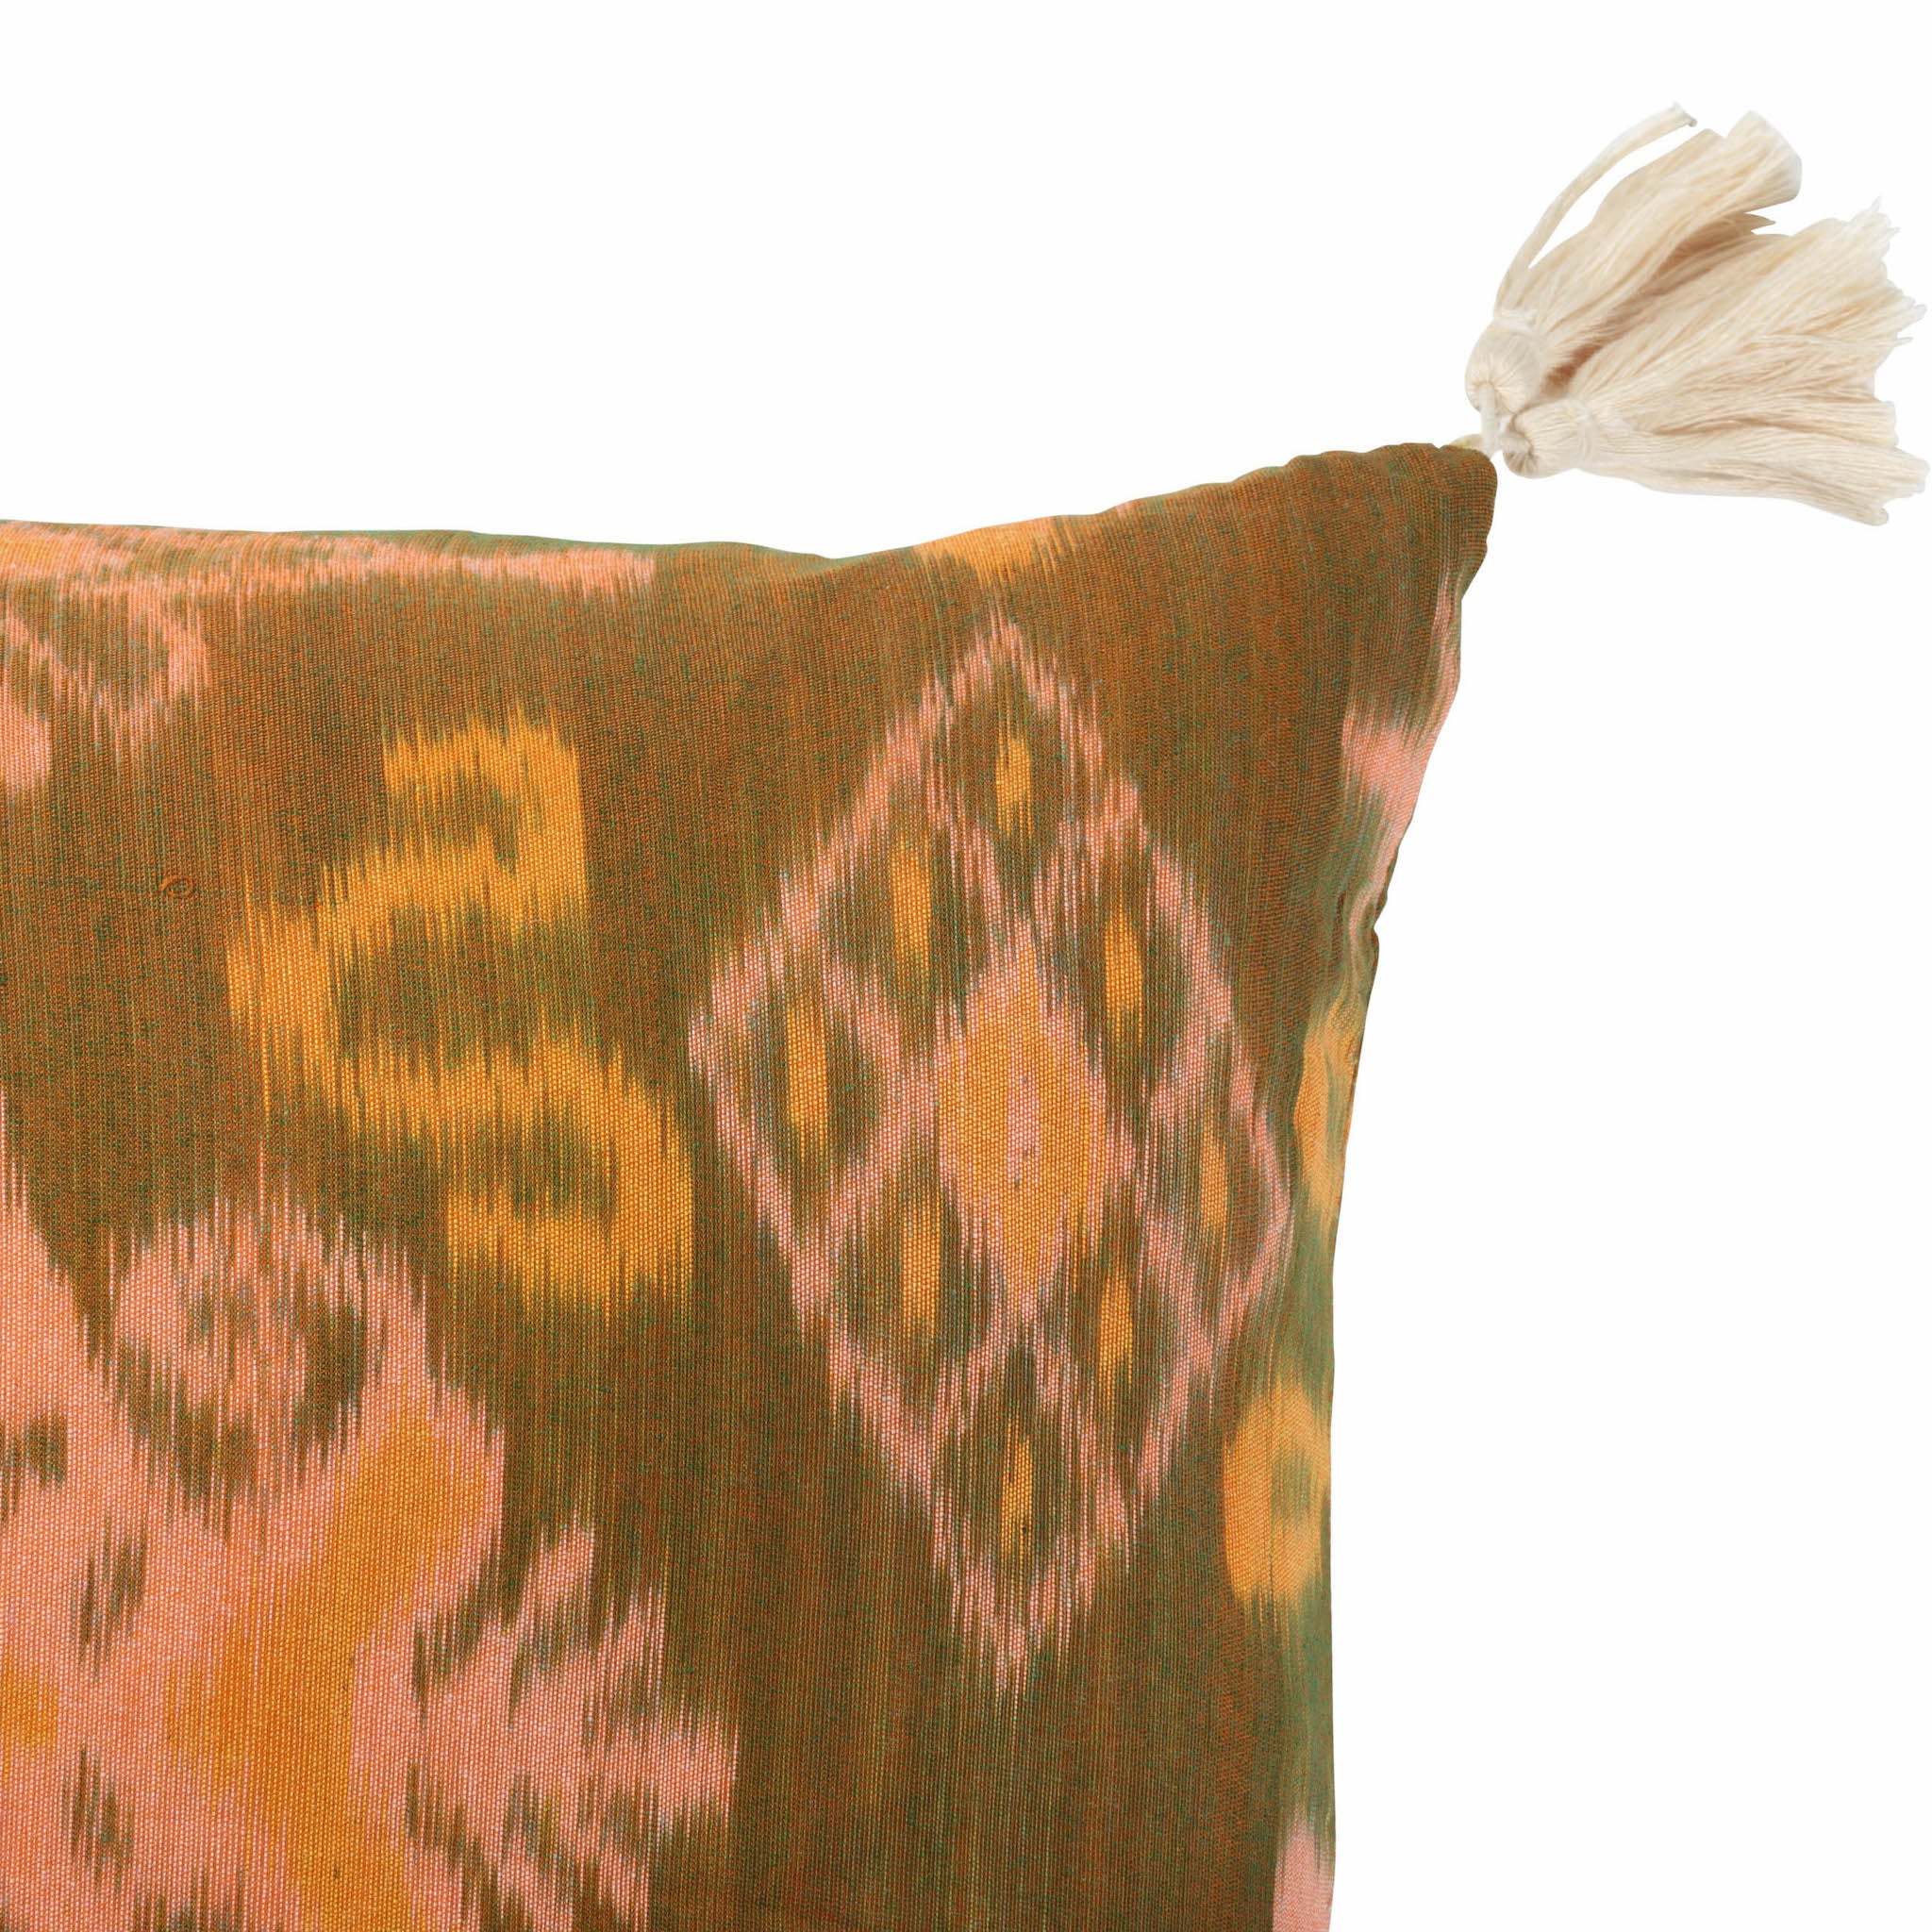 Peach and Olive Green Cotton Ikat Square Scatter Cushion with Tassels from Bali, Indonesia - DETAIL